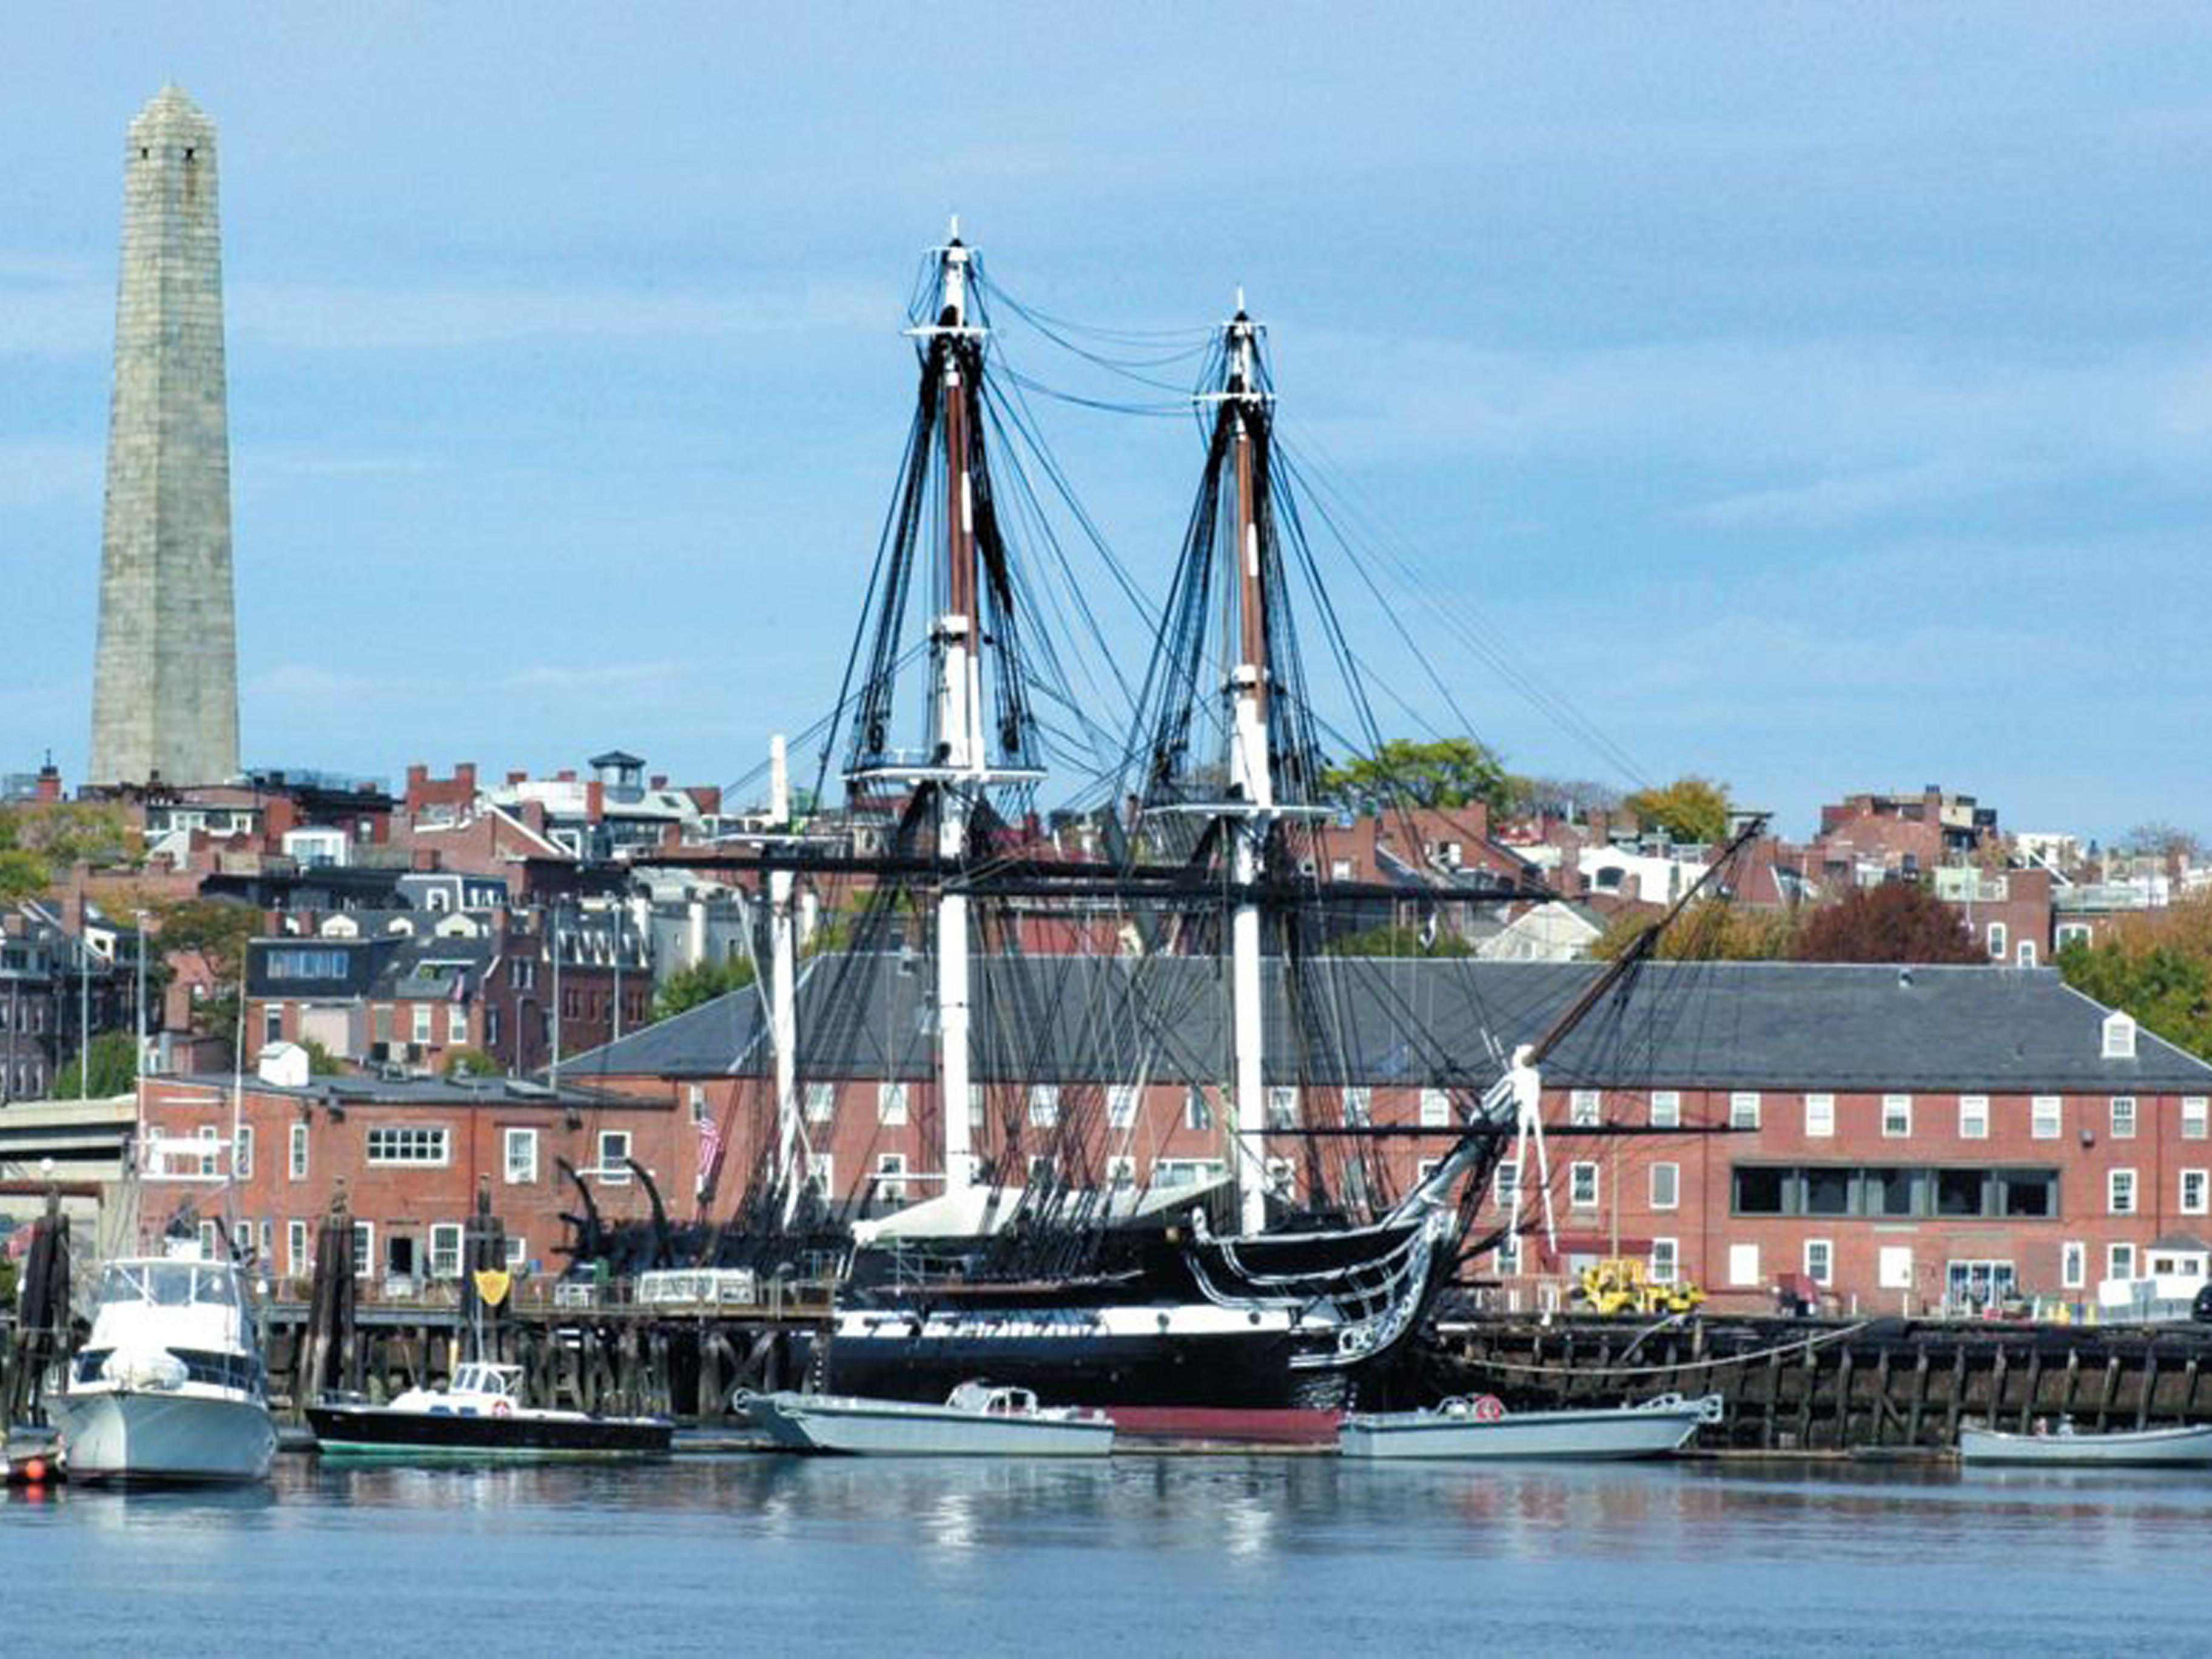 See the historic USS Constitution - Charlestown just 2 miles away.